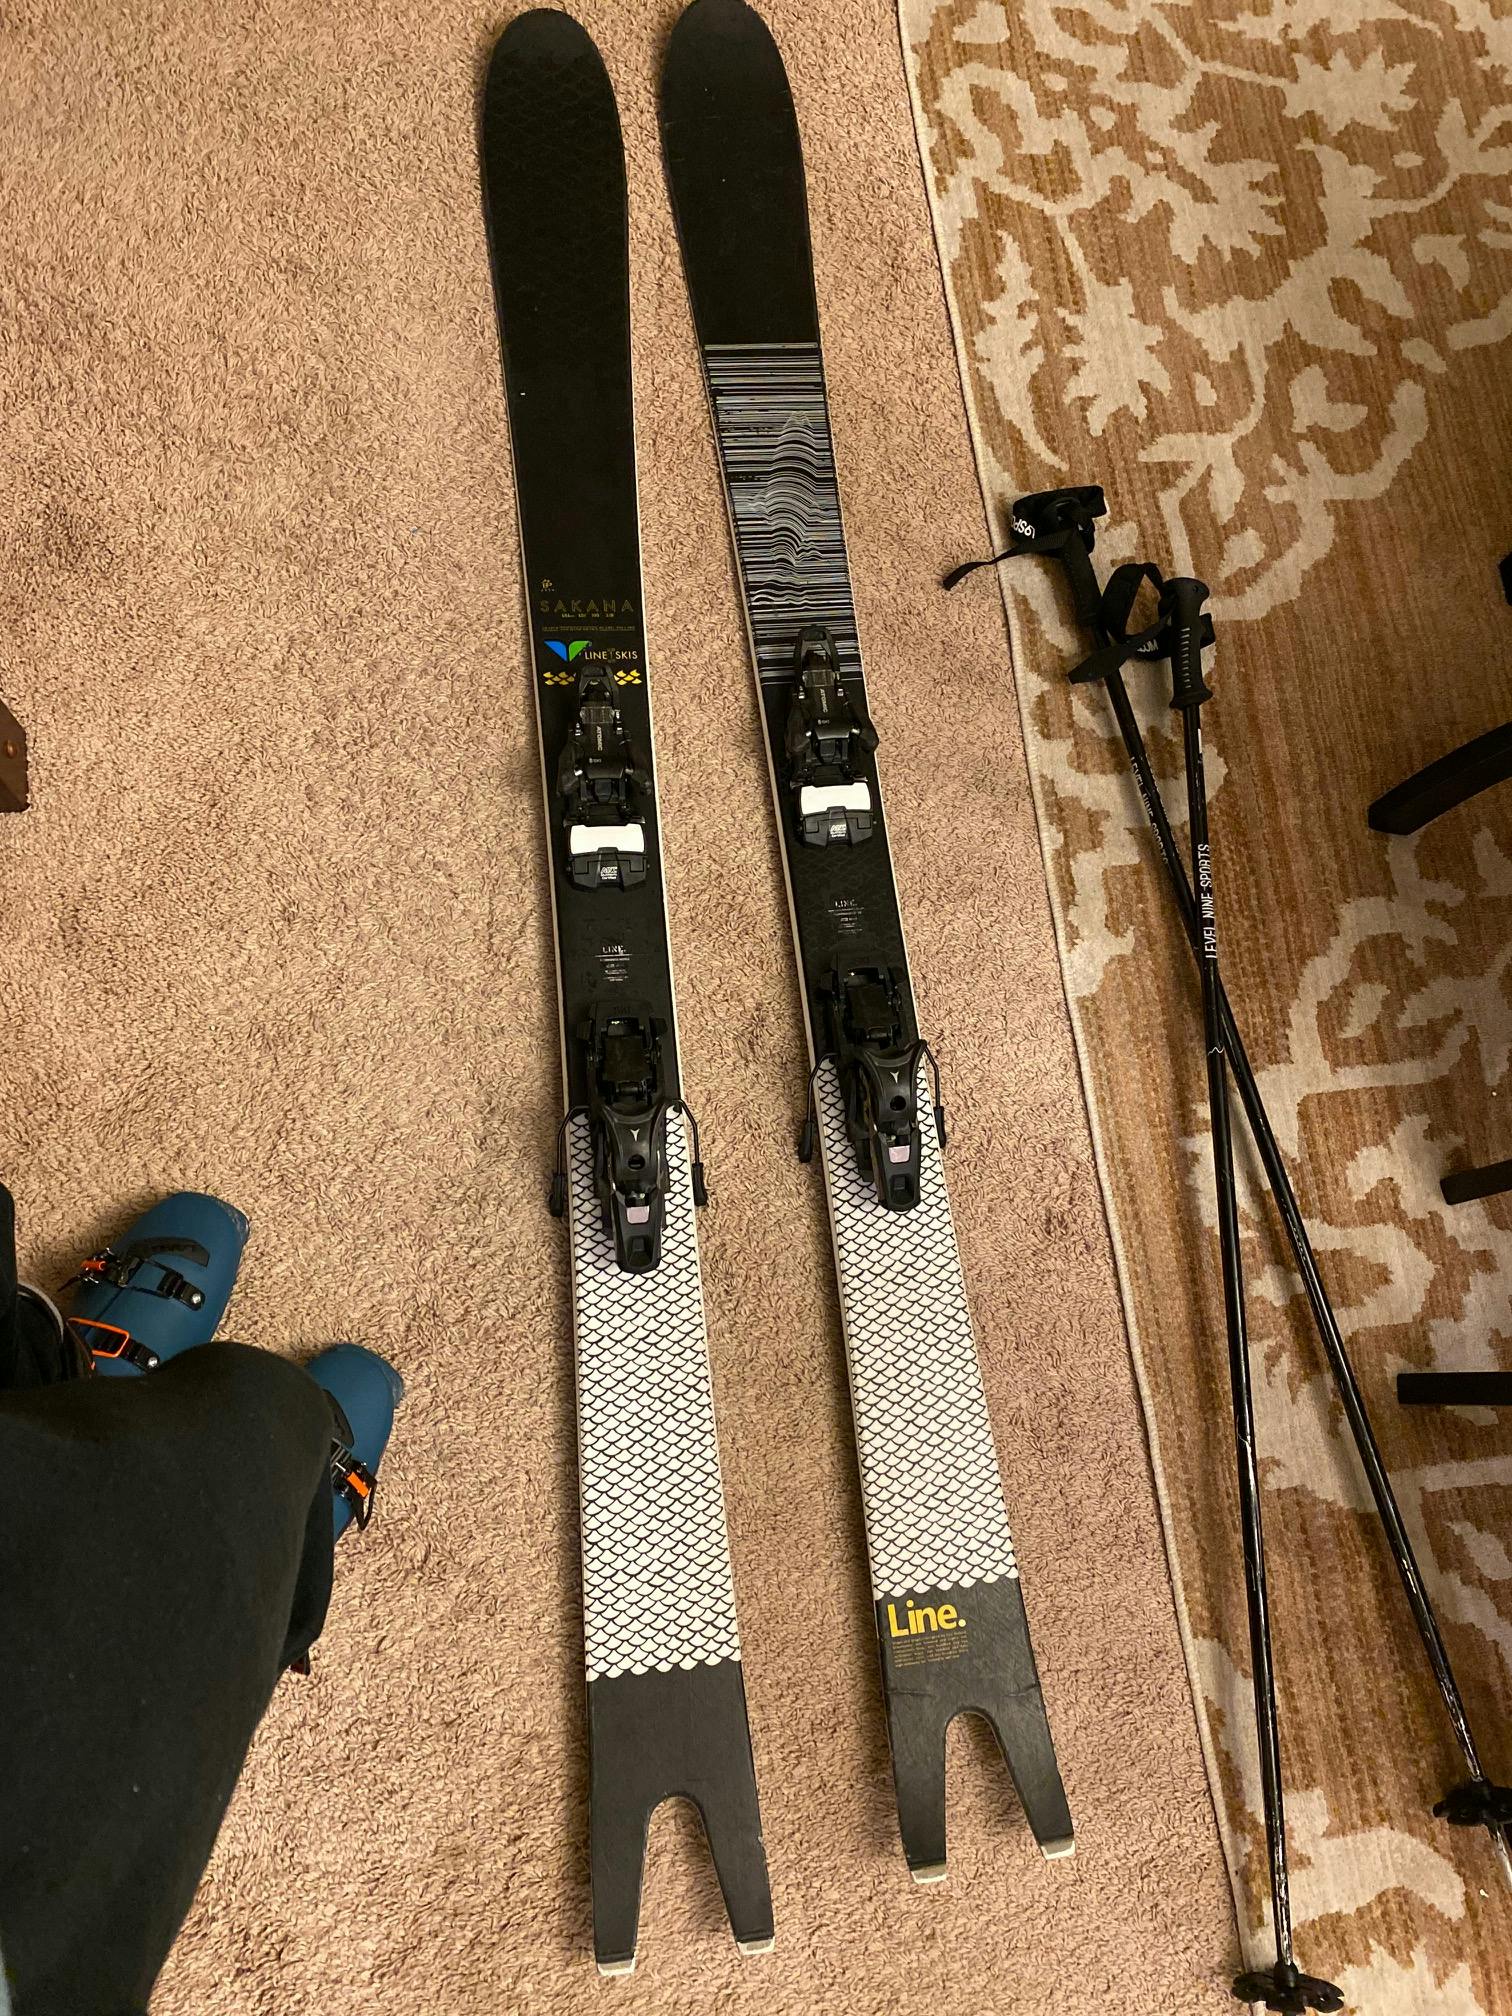 Skis with bindings laying on the floor.